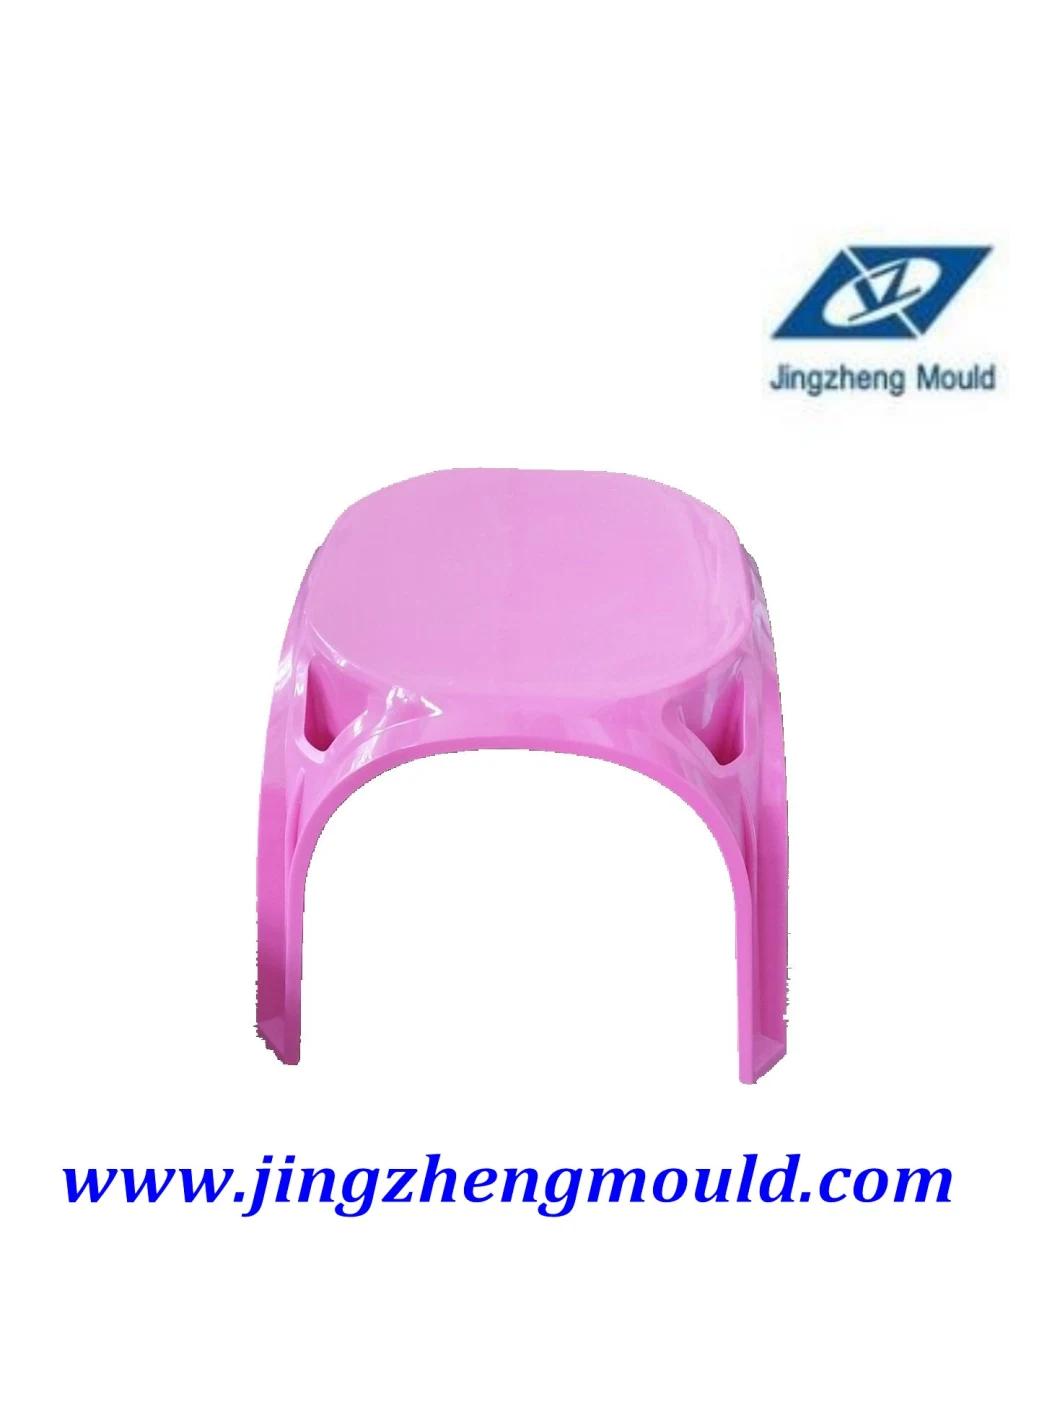 2014 High Quality Home Plastic Mold